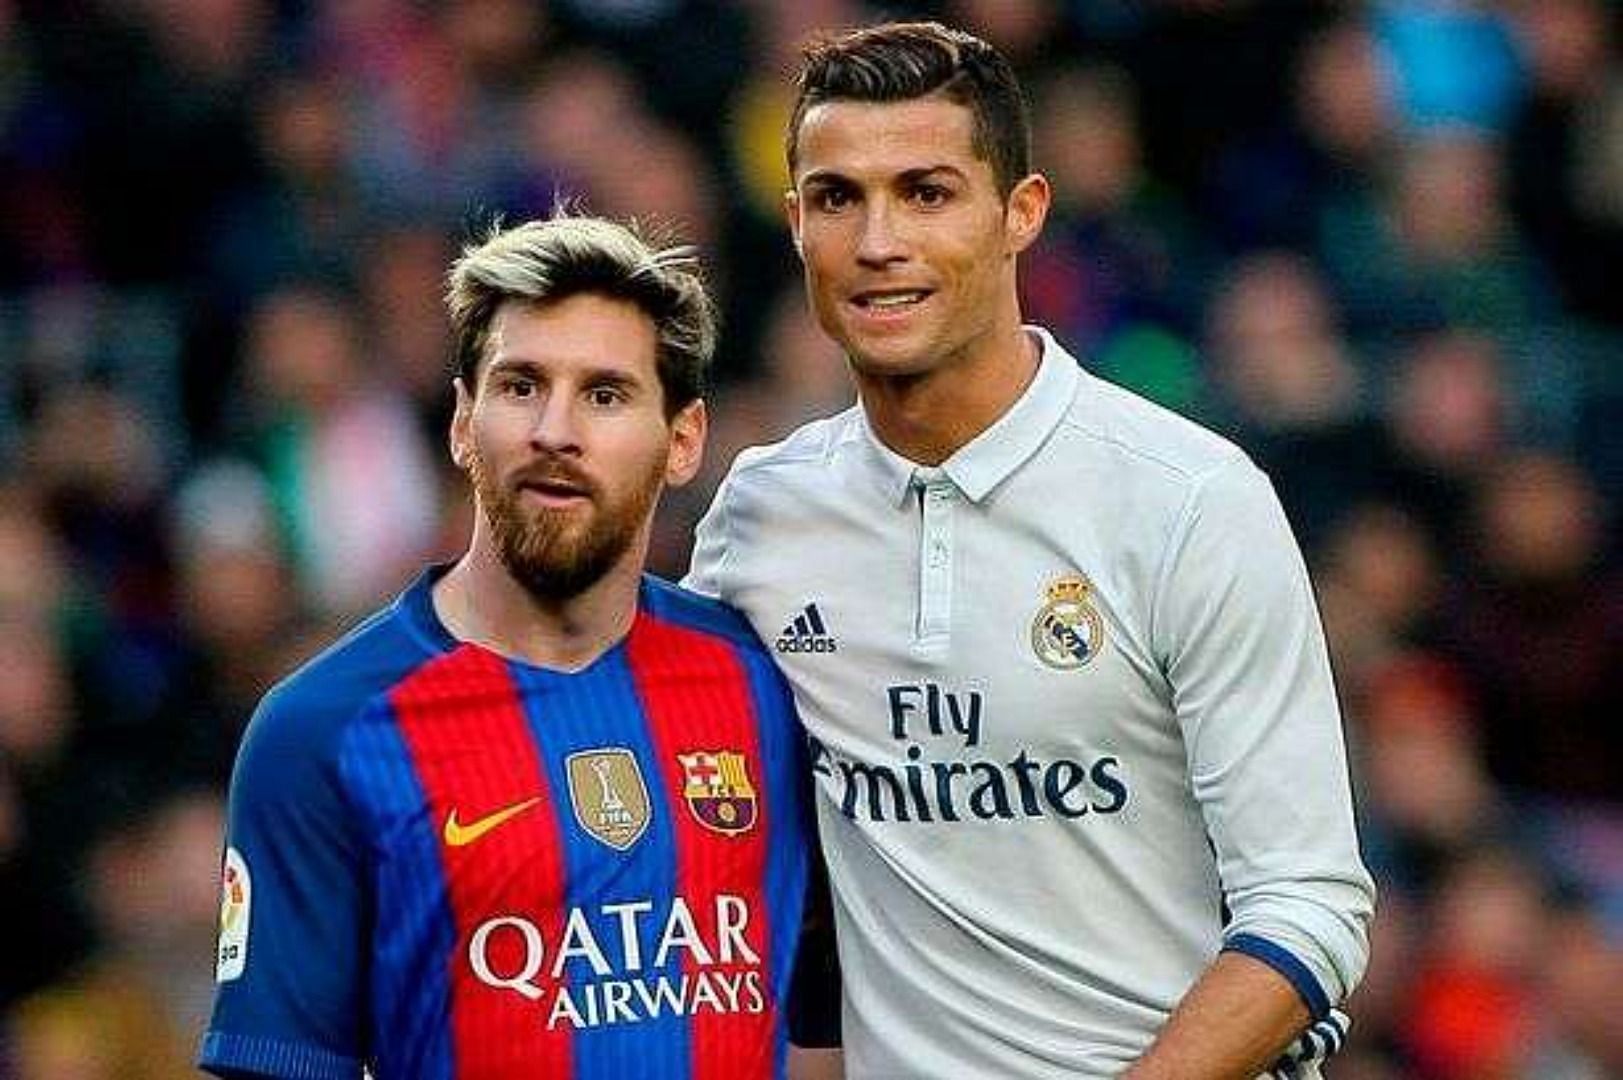 The GOAT debate is hotly contested between Ronaldo and Messi.